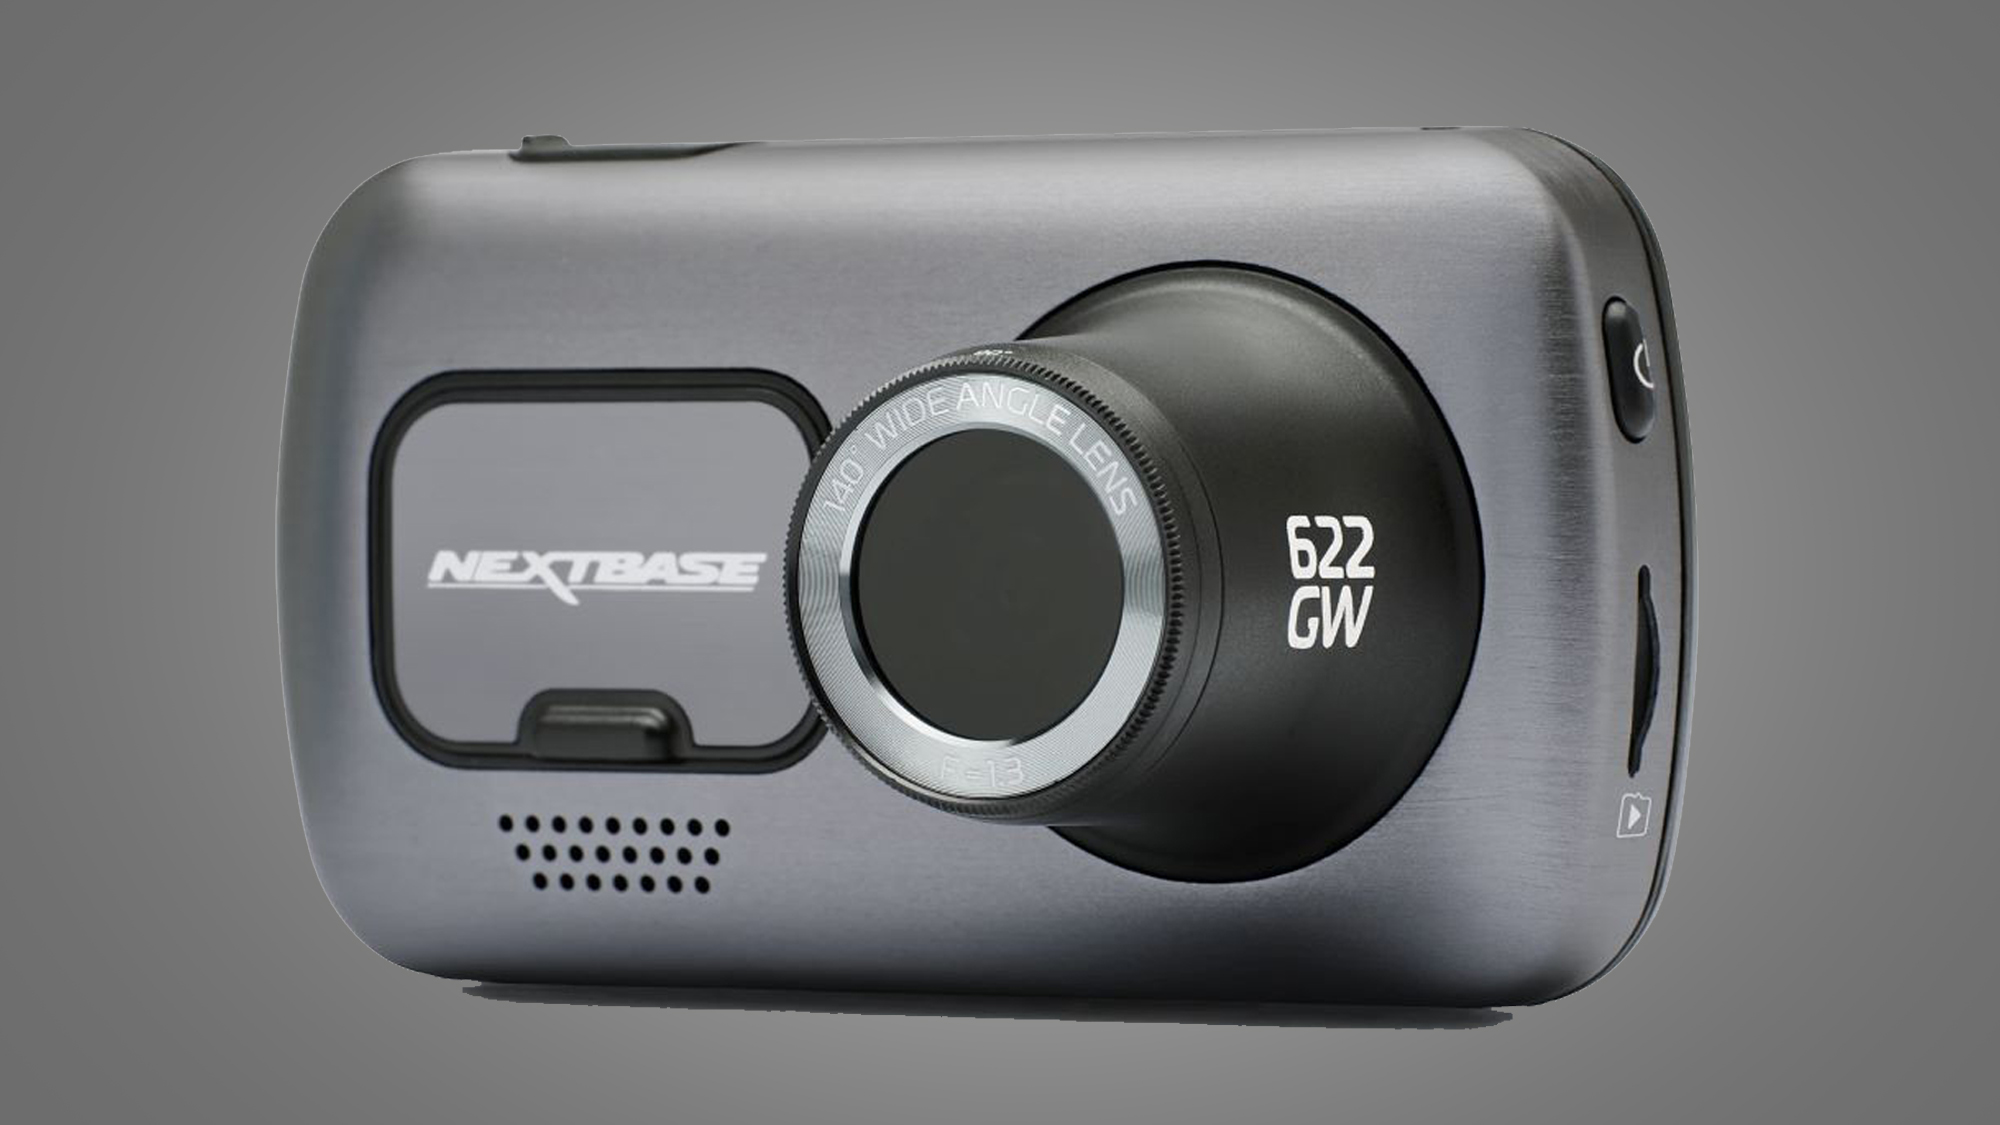 The Nextbase 622GW, one of the best dash cam, on a grey background